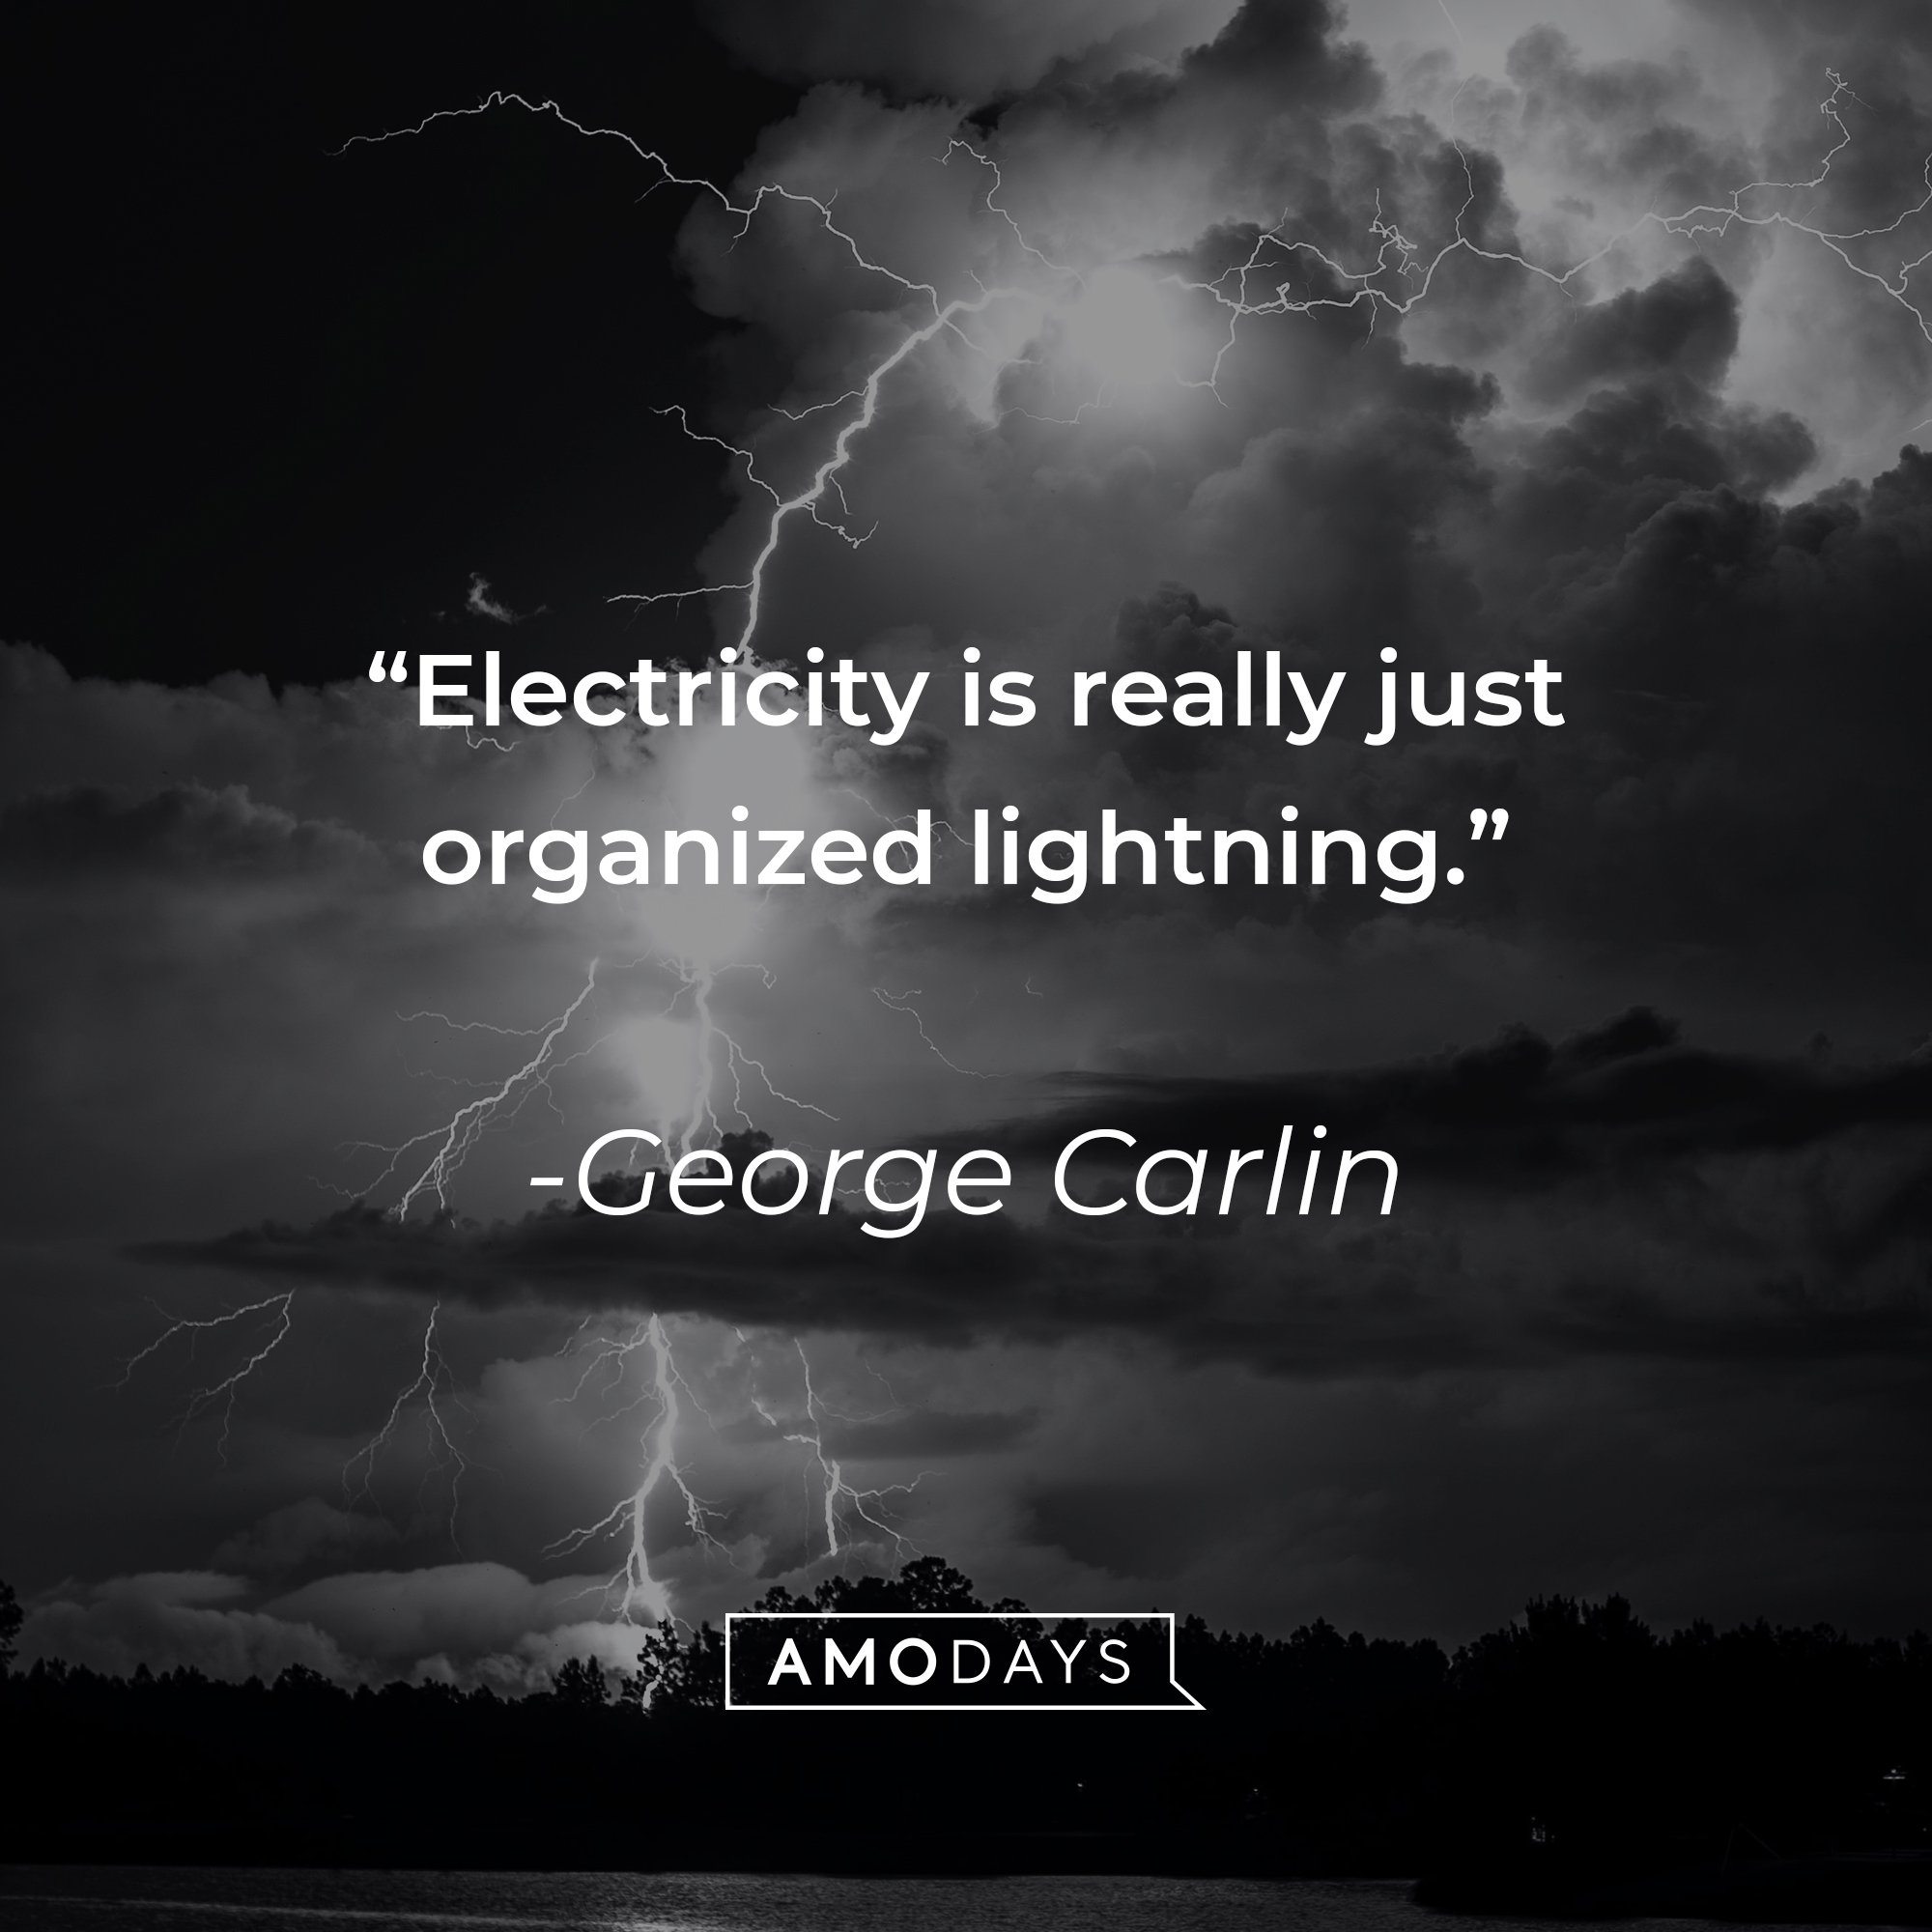 George Carlin’s quote: "Electricity is really just organized lightning" | Image: AmoDays  